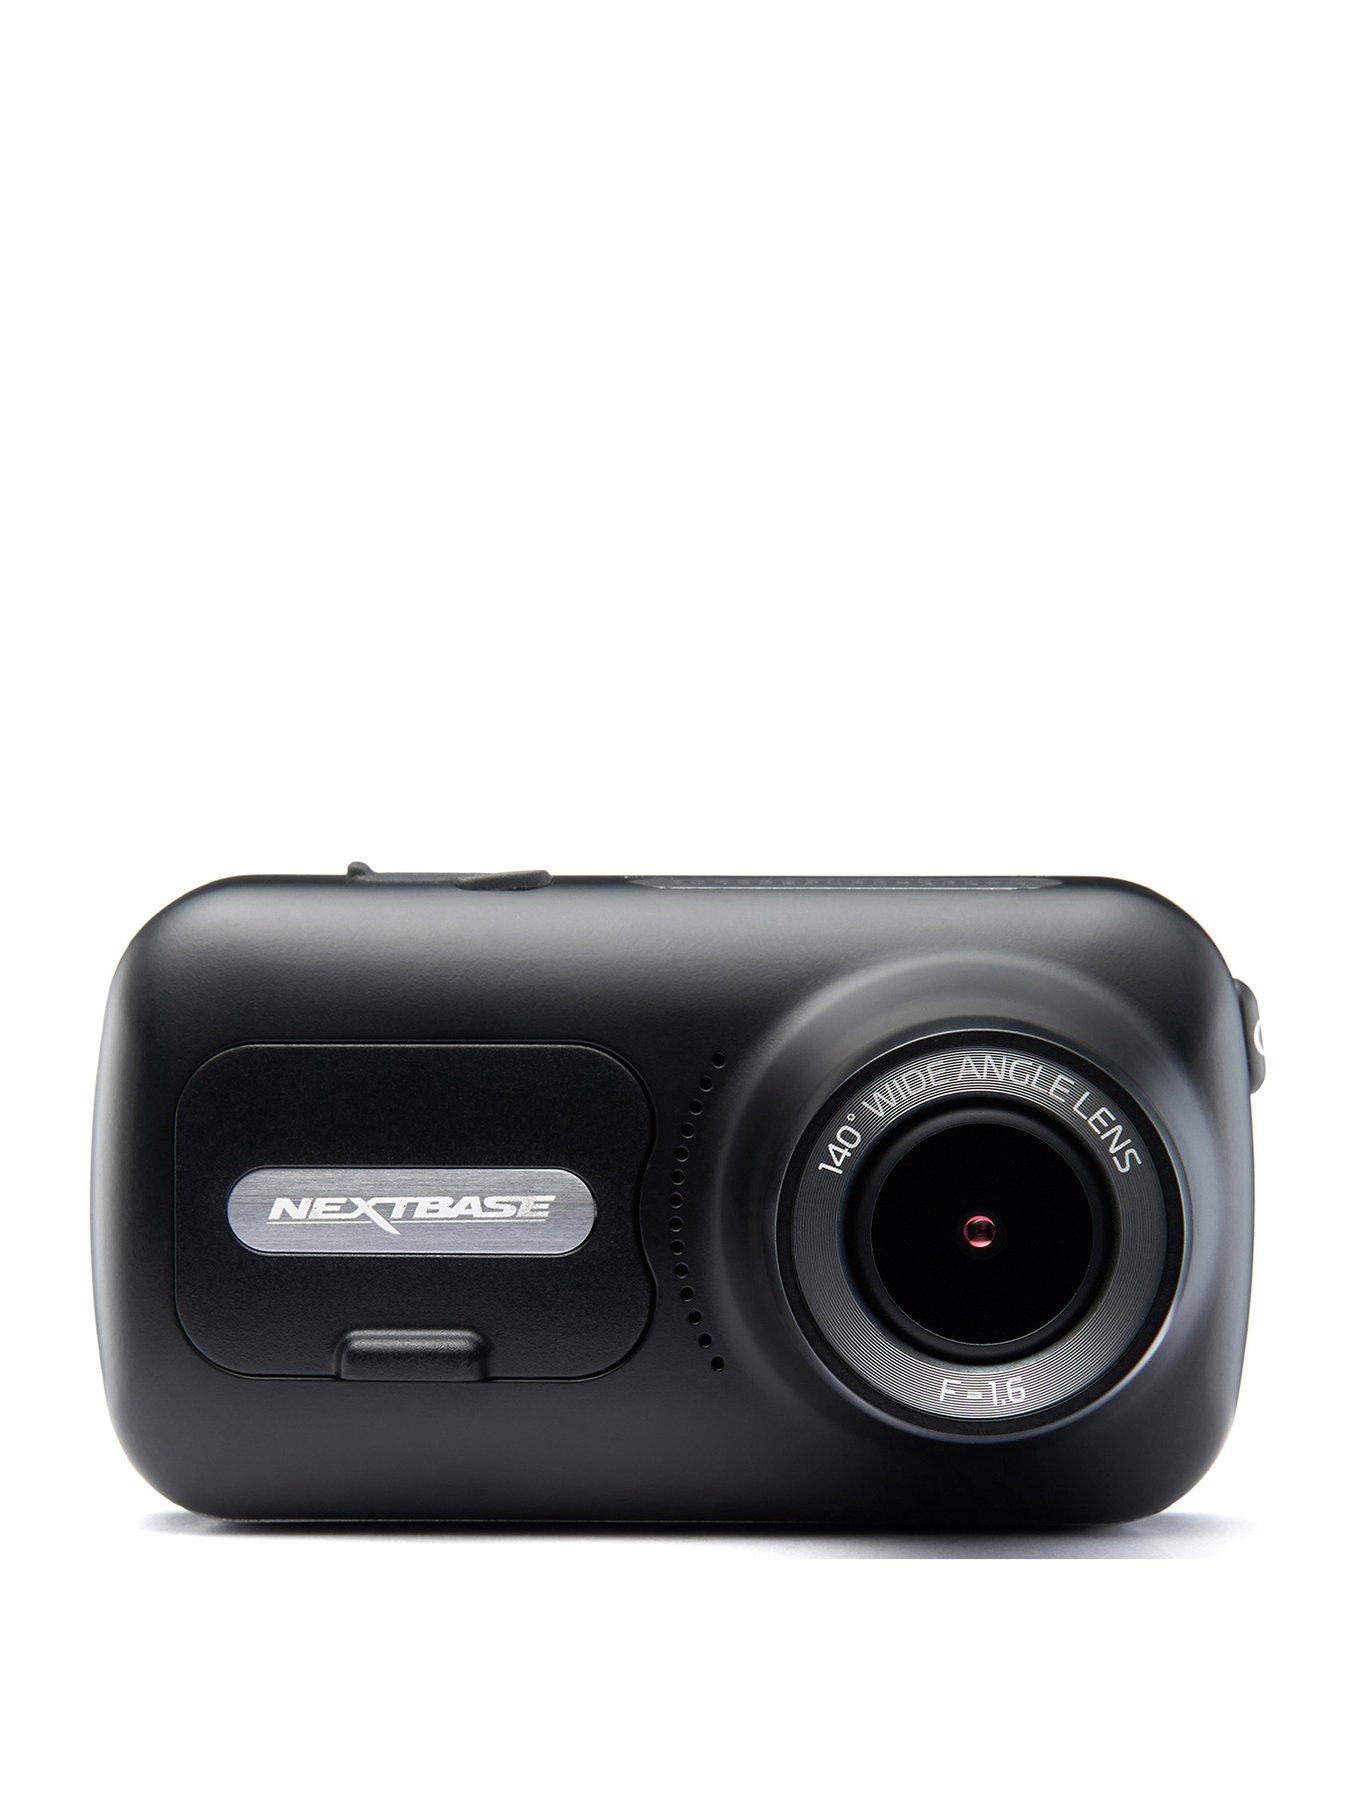 Nextbase 322GW Dash Cam Front and Rear Camera- Full 1080p/60fps HD in Car Camera- WiFi Bluetooth GPS- SOS Emergency Response, Intelligent Parking Mod